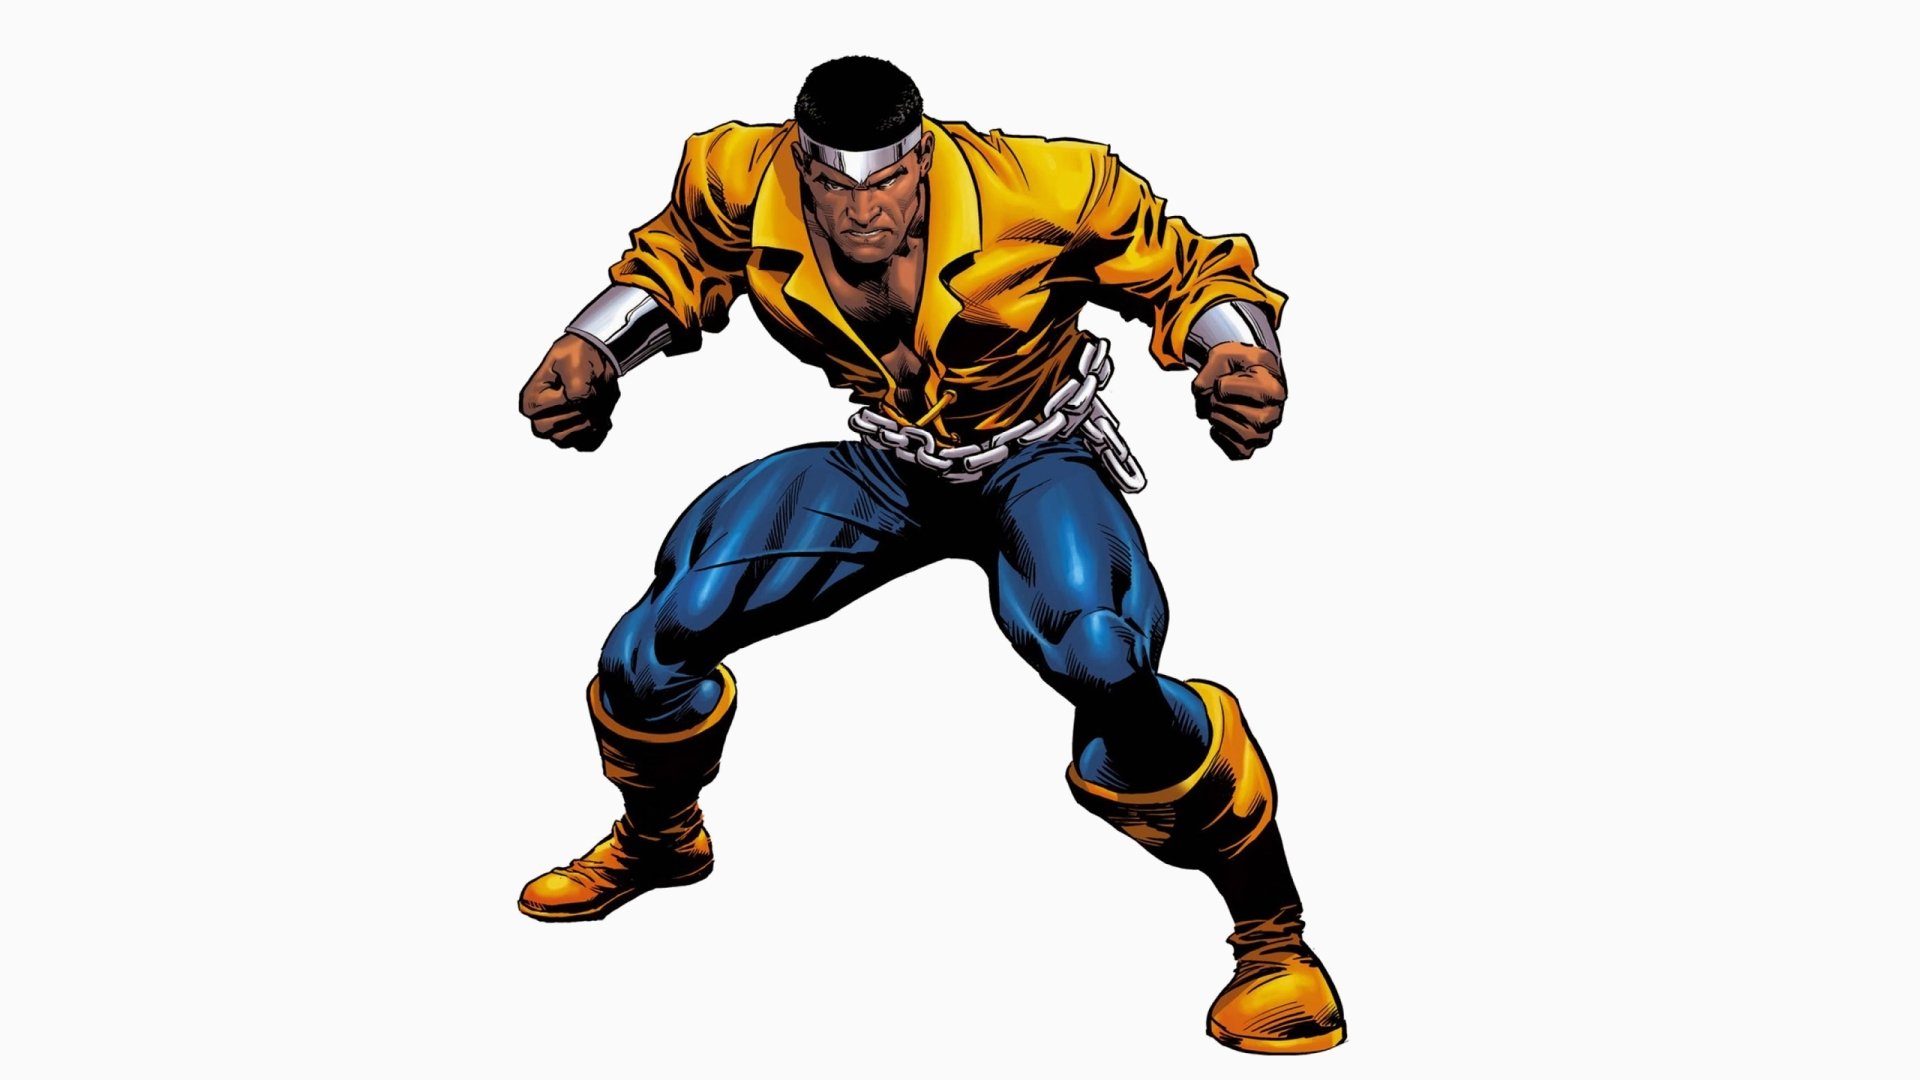 Luke Cage Wallpapers